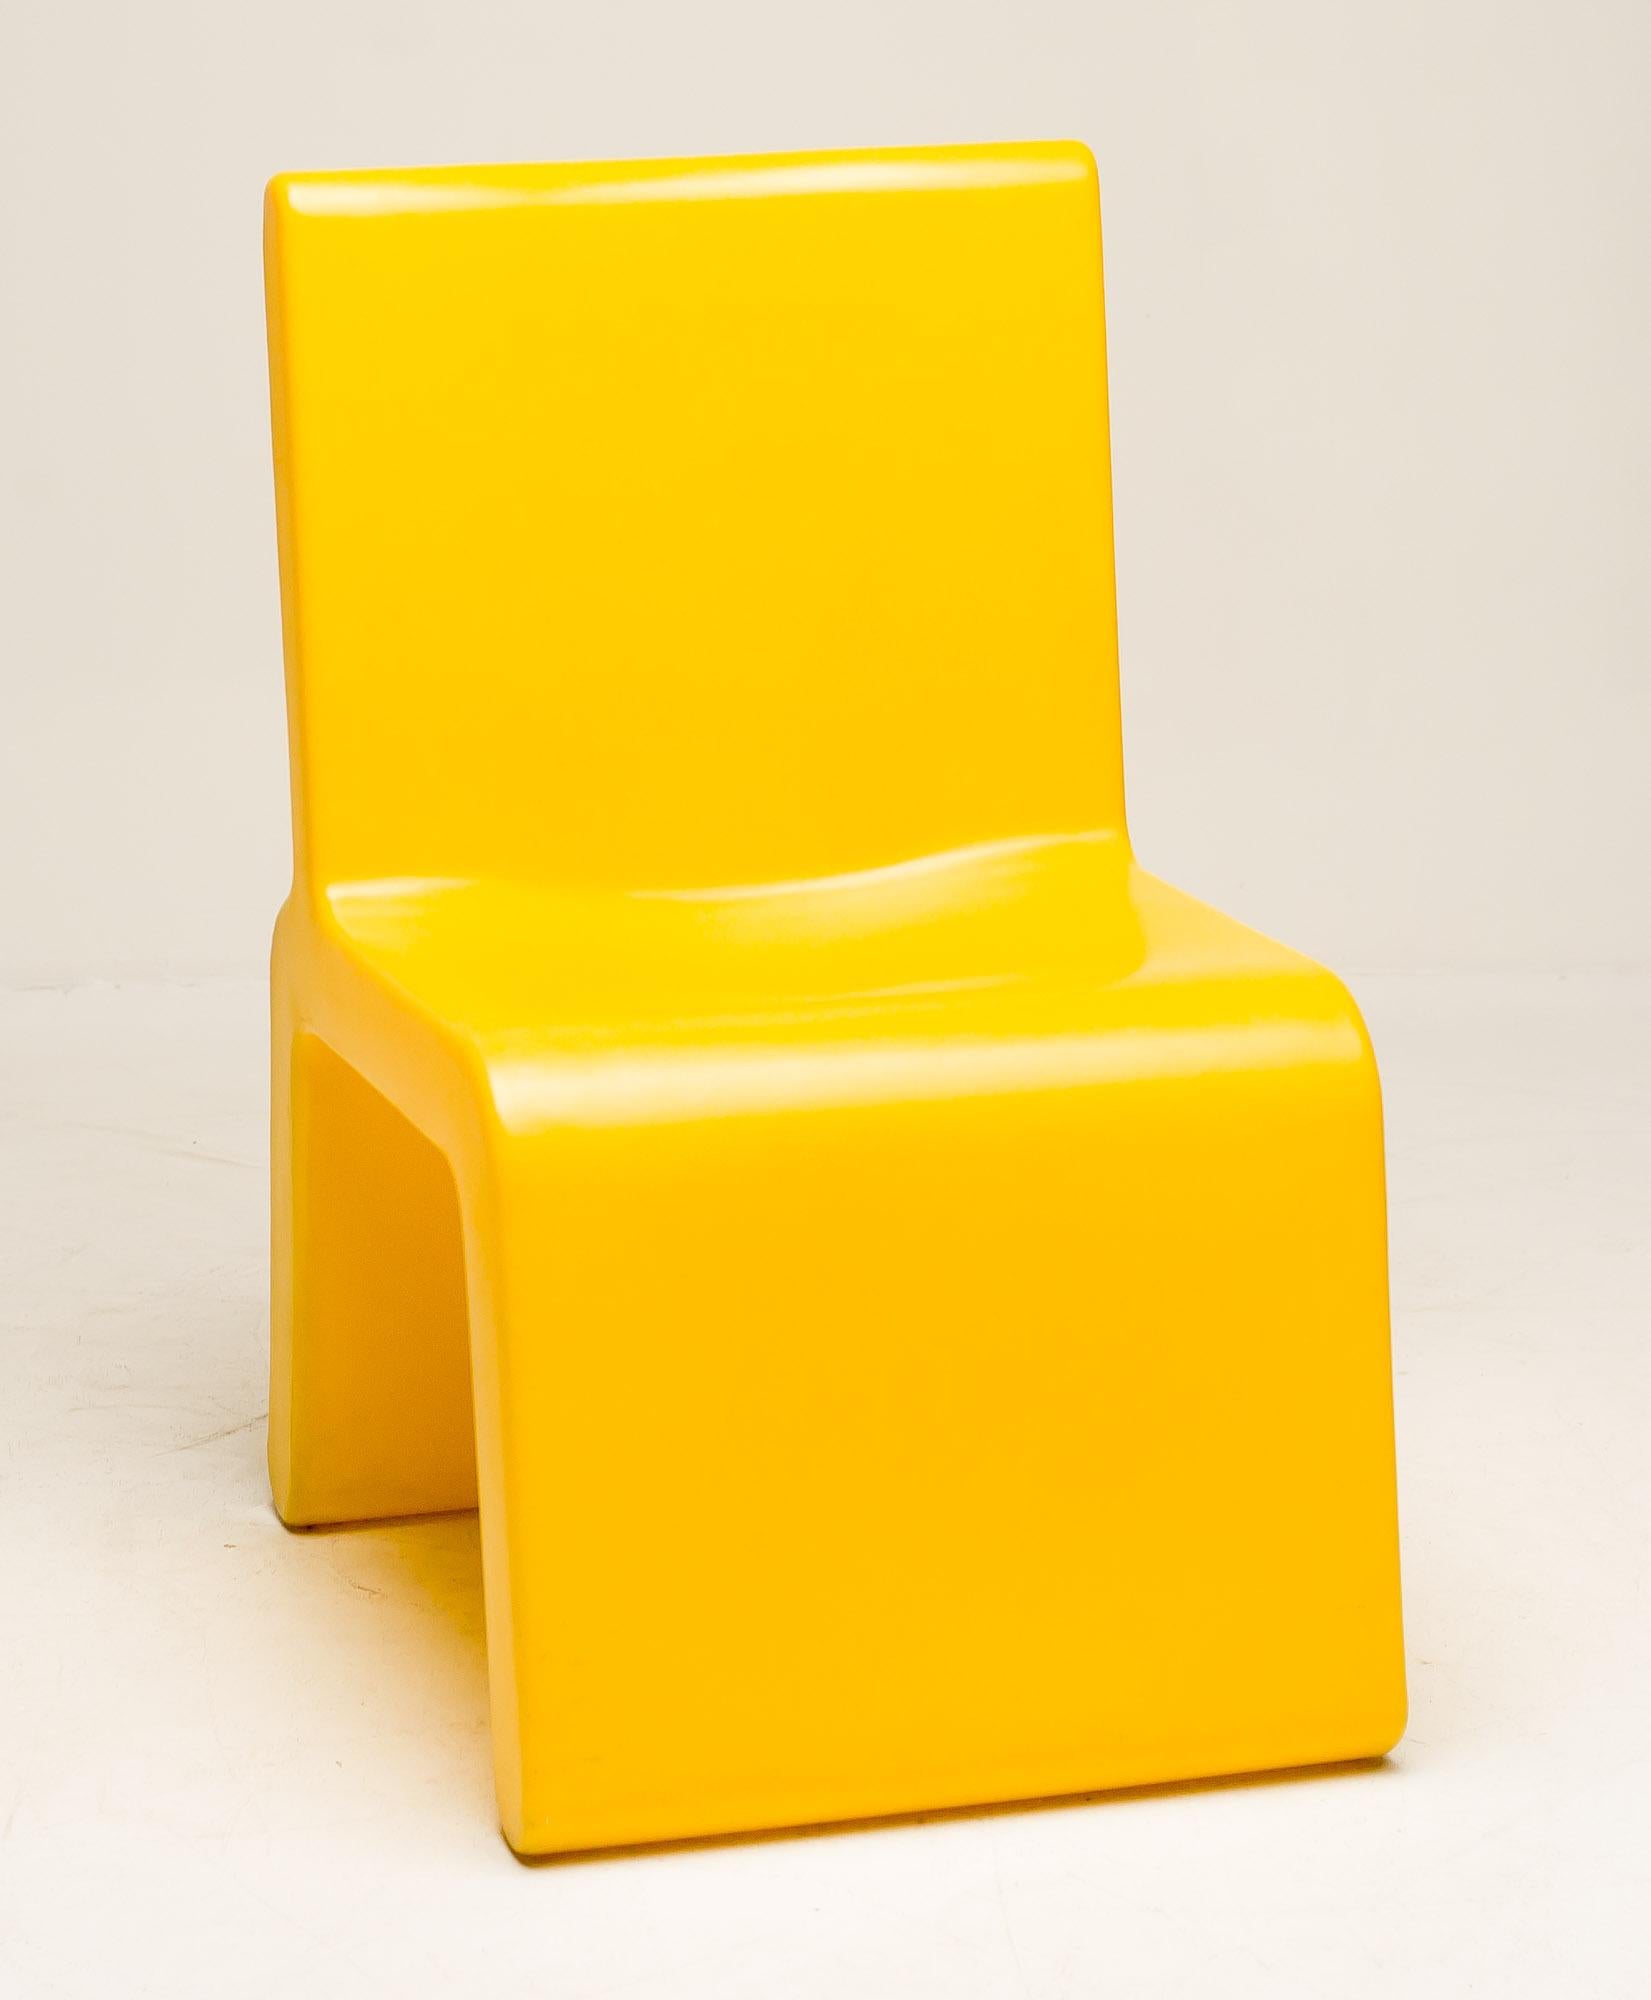 Plastic Yellow WL&T Chair by Marc Newson for Walter Van Beirendonck